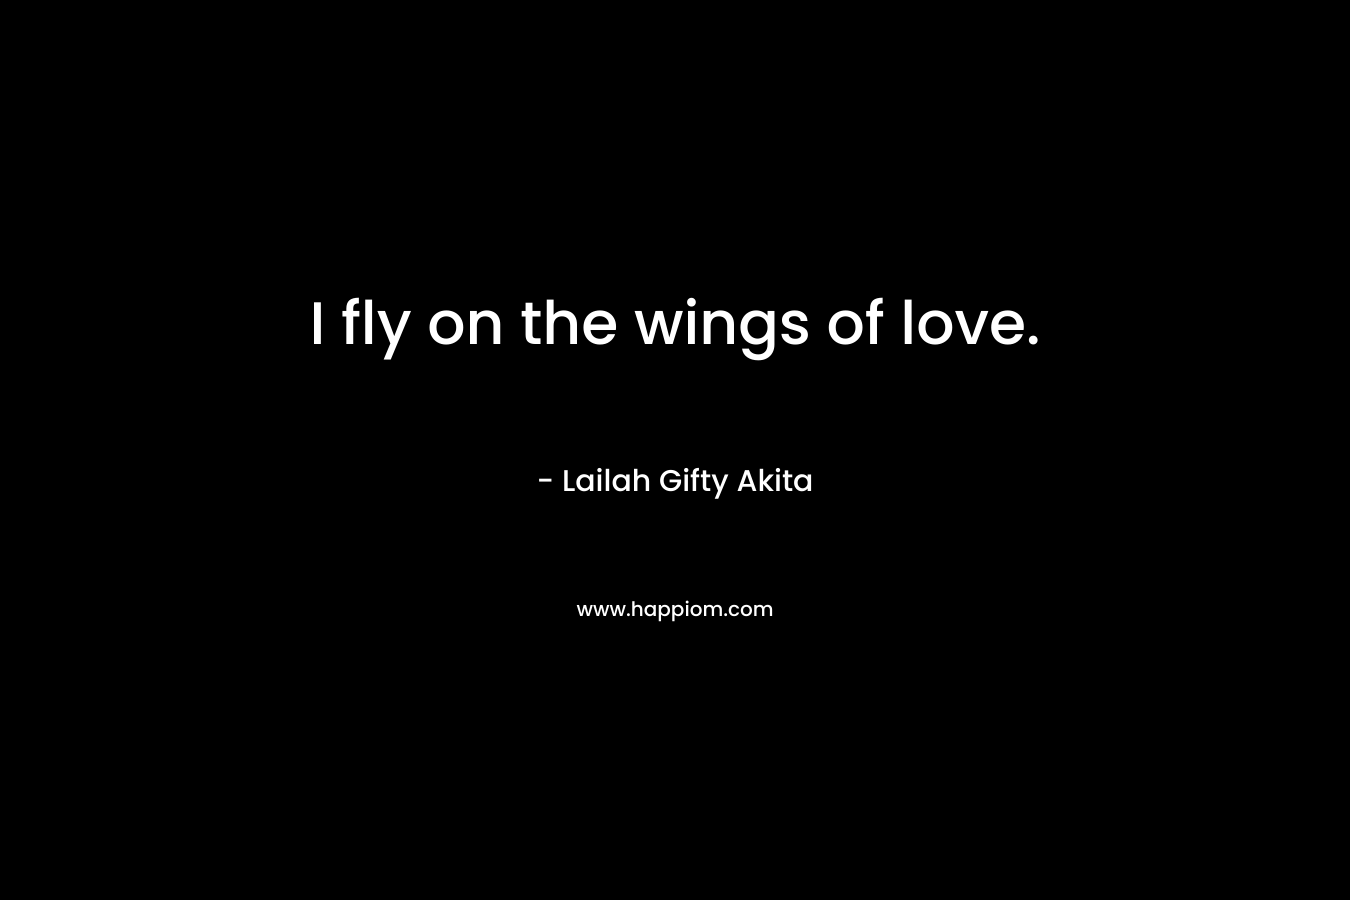 I fly on the wings of love.